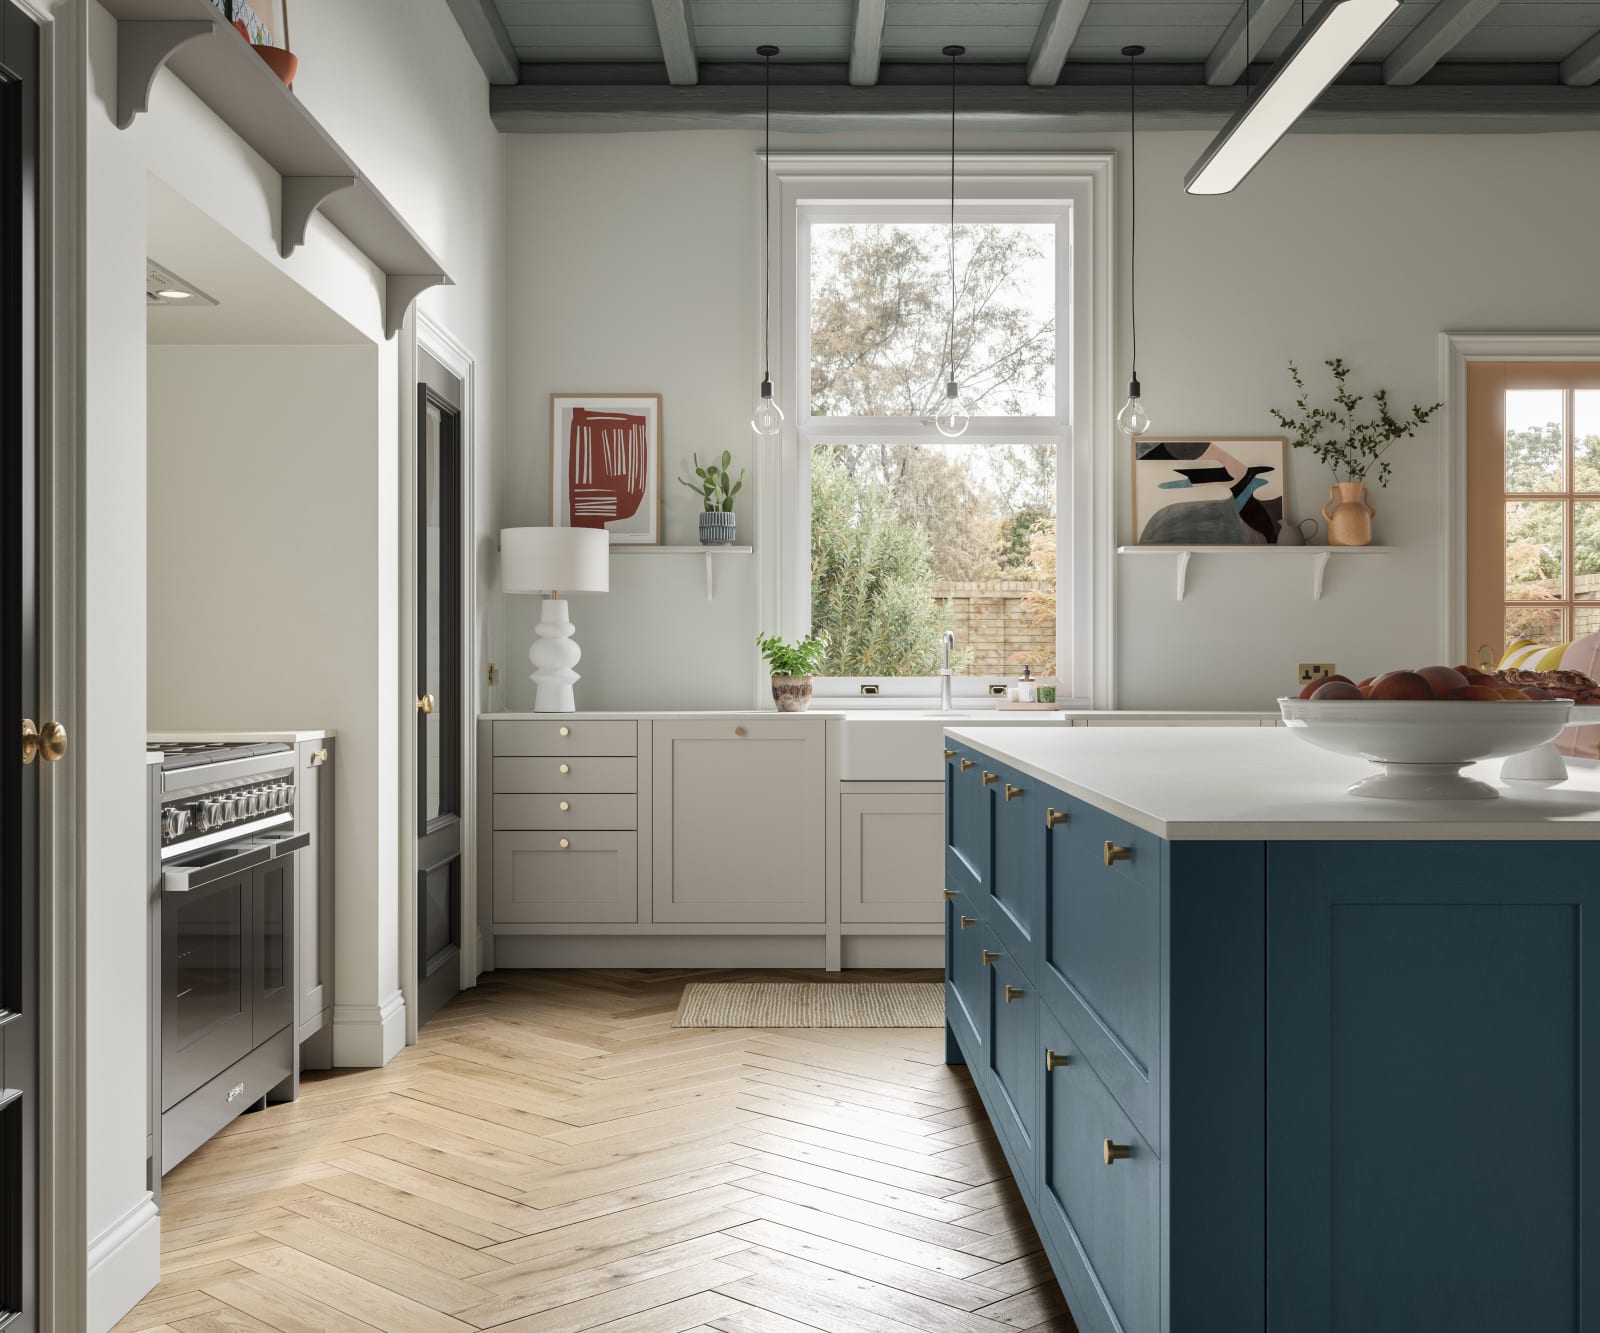 Traditional shaker kitchen Wardley with modern shades and decorations. A blue kitchen island.